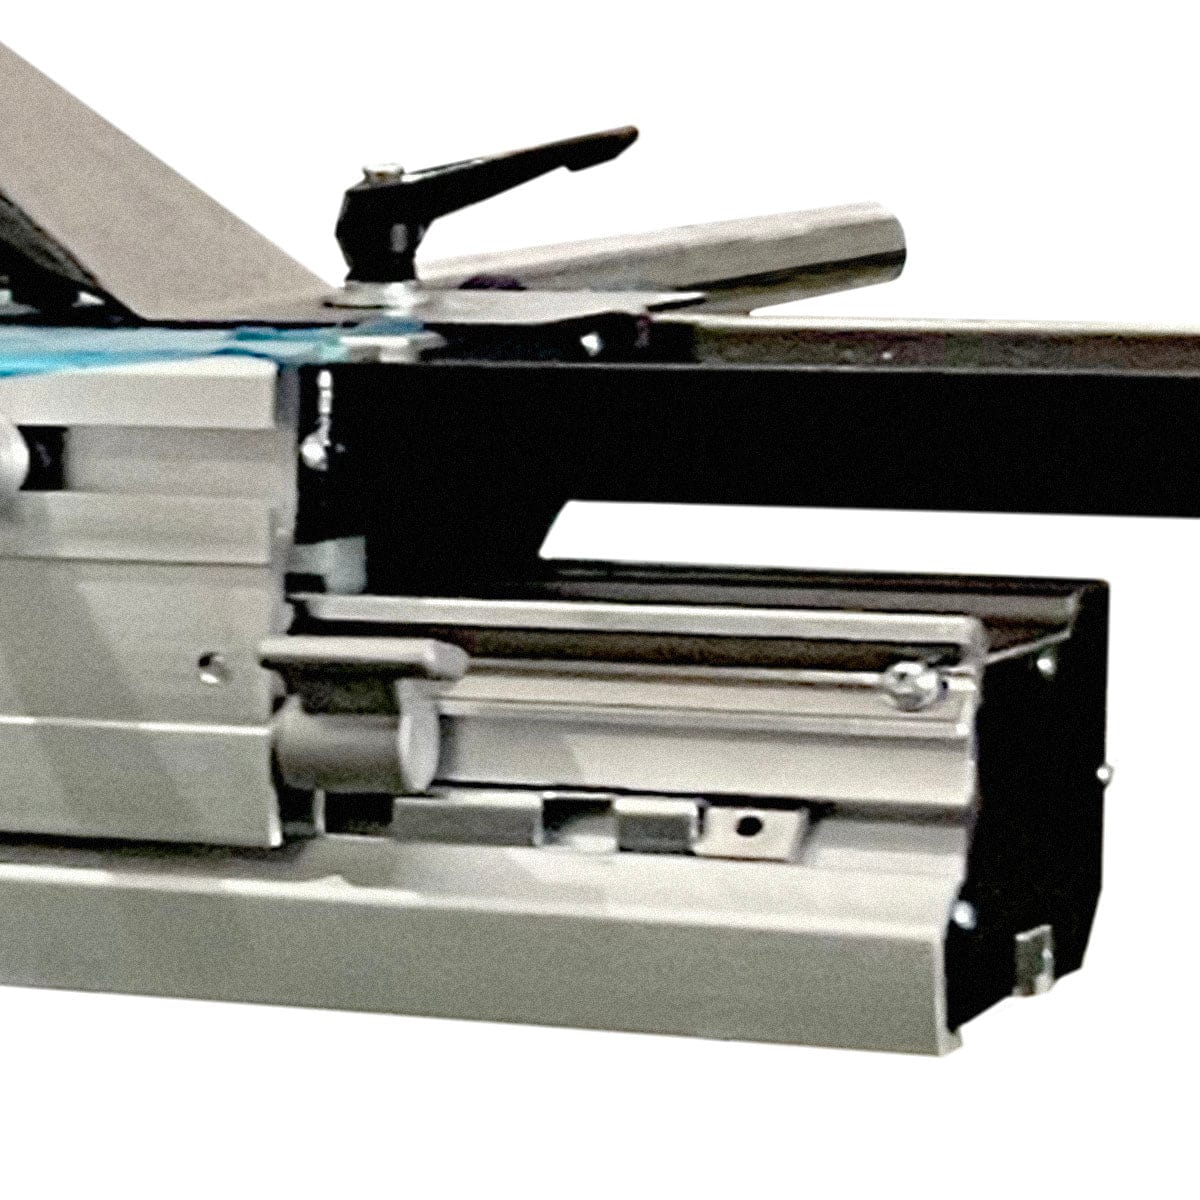 Maksiwa Sliding Panel Table Saw, Single Phase, Power and Precision with a Small Footprint - BMS.1600.IR